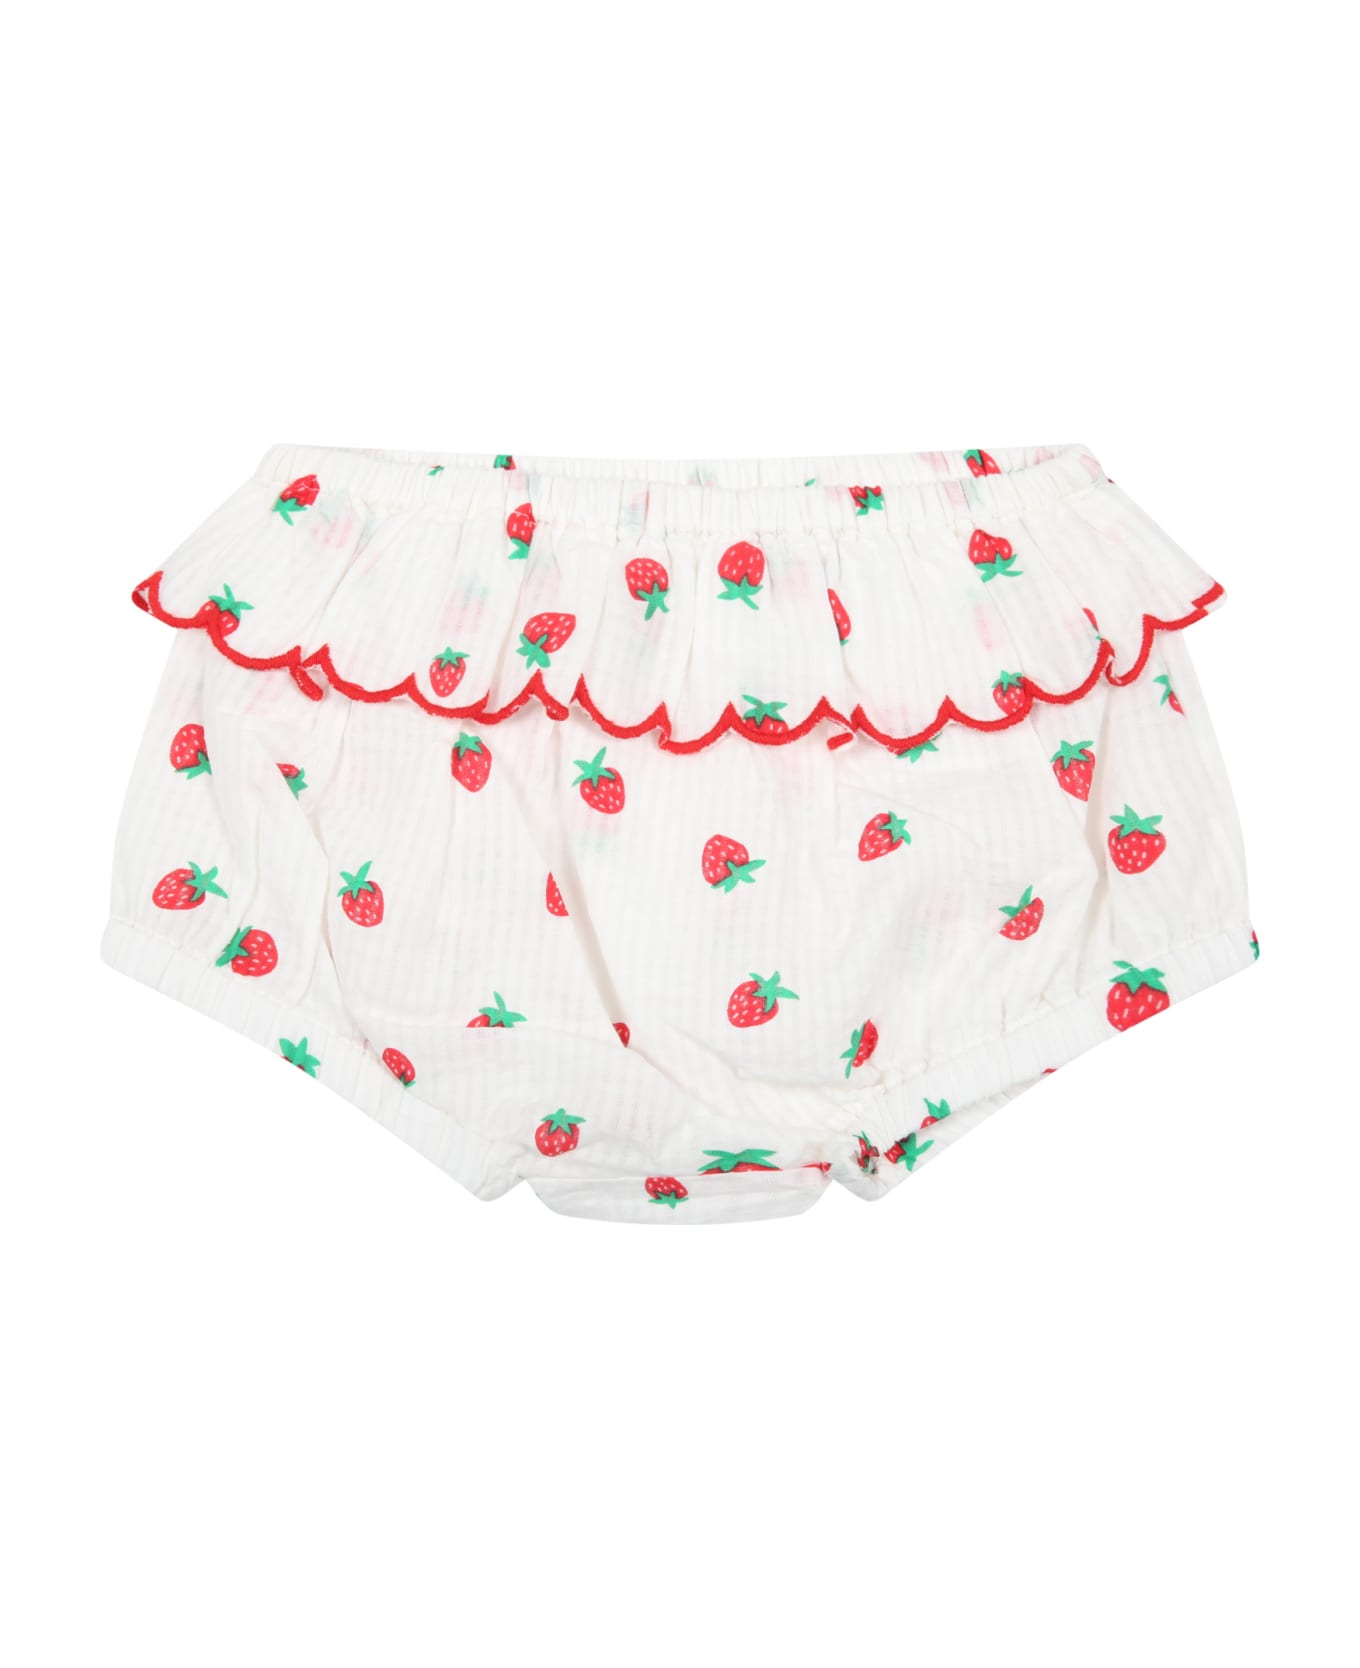 Stella McCartney Kids White Suit For Baby Girl With Red Strawberries - Bianco